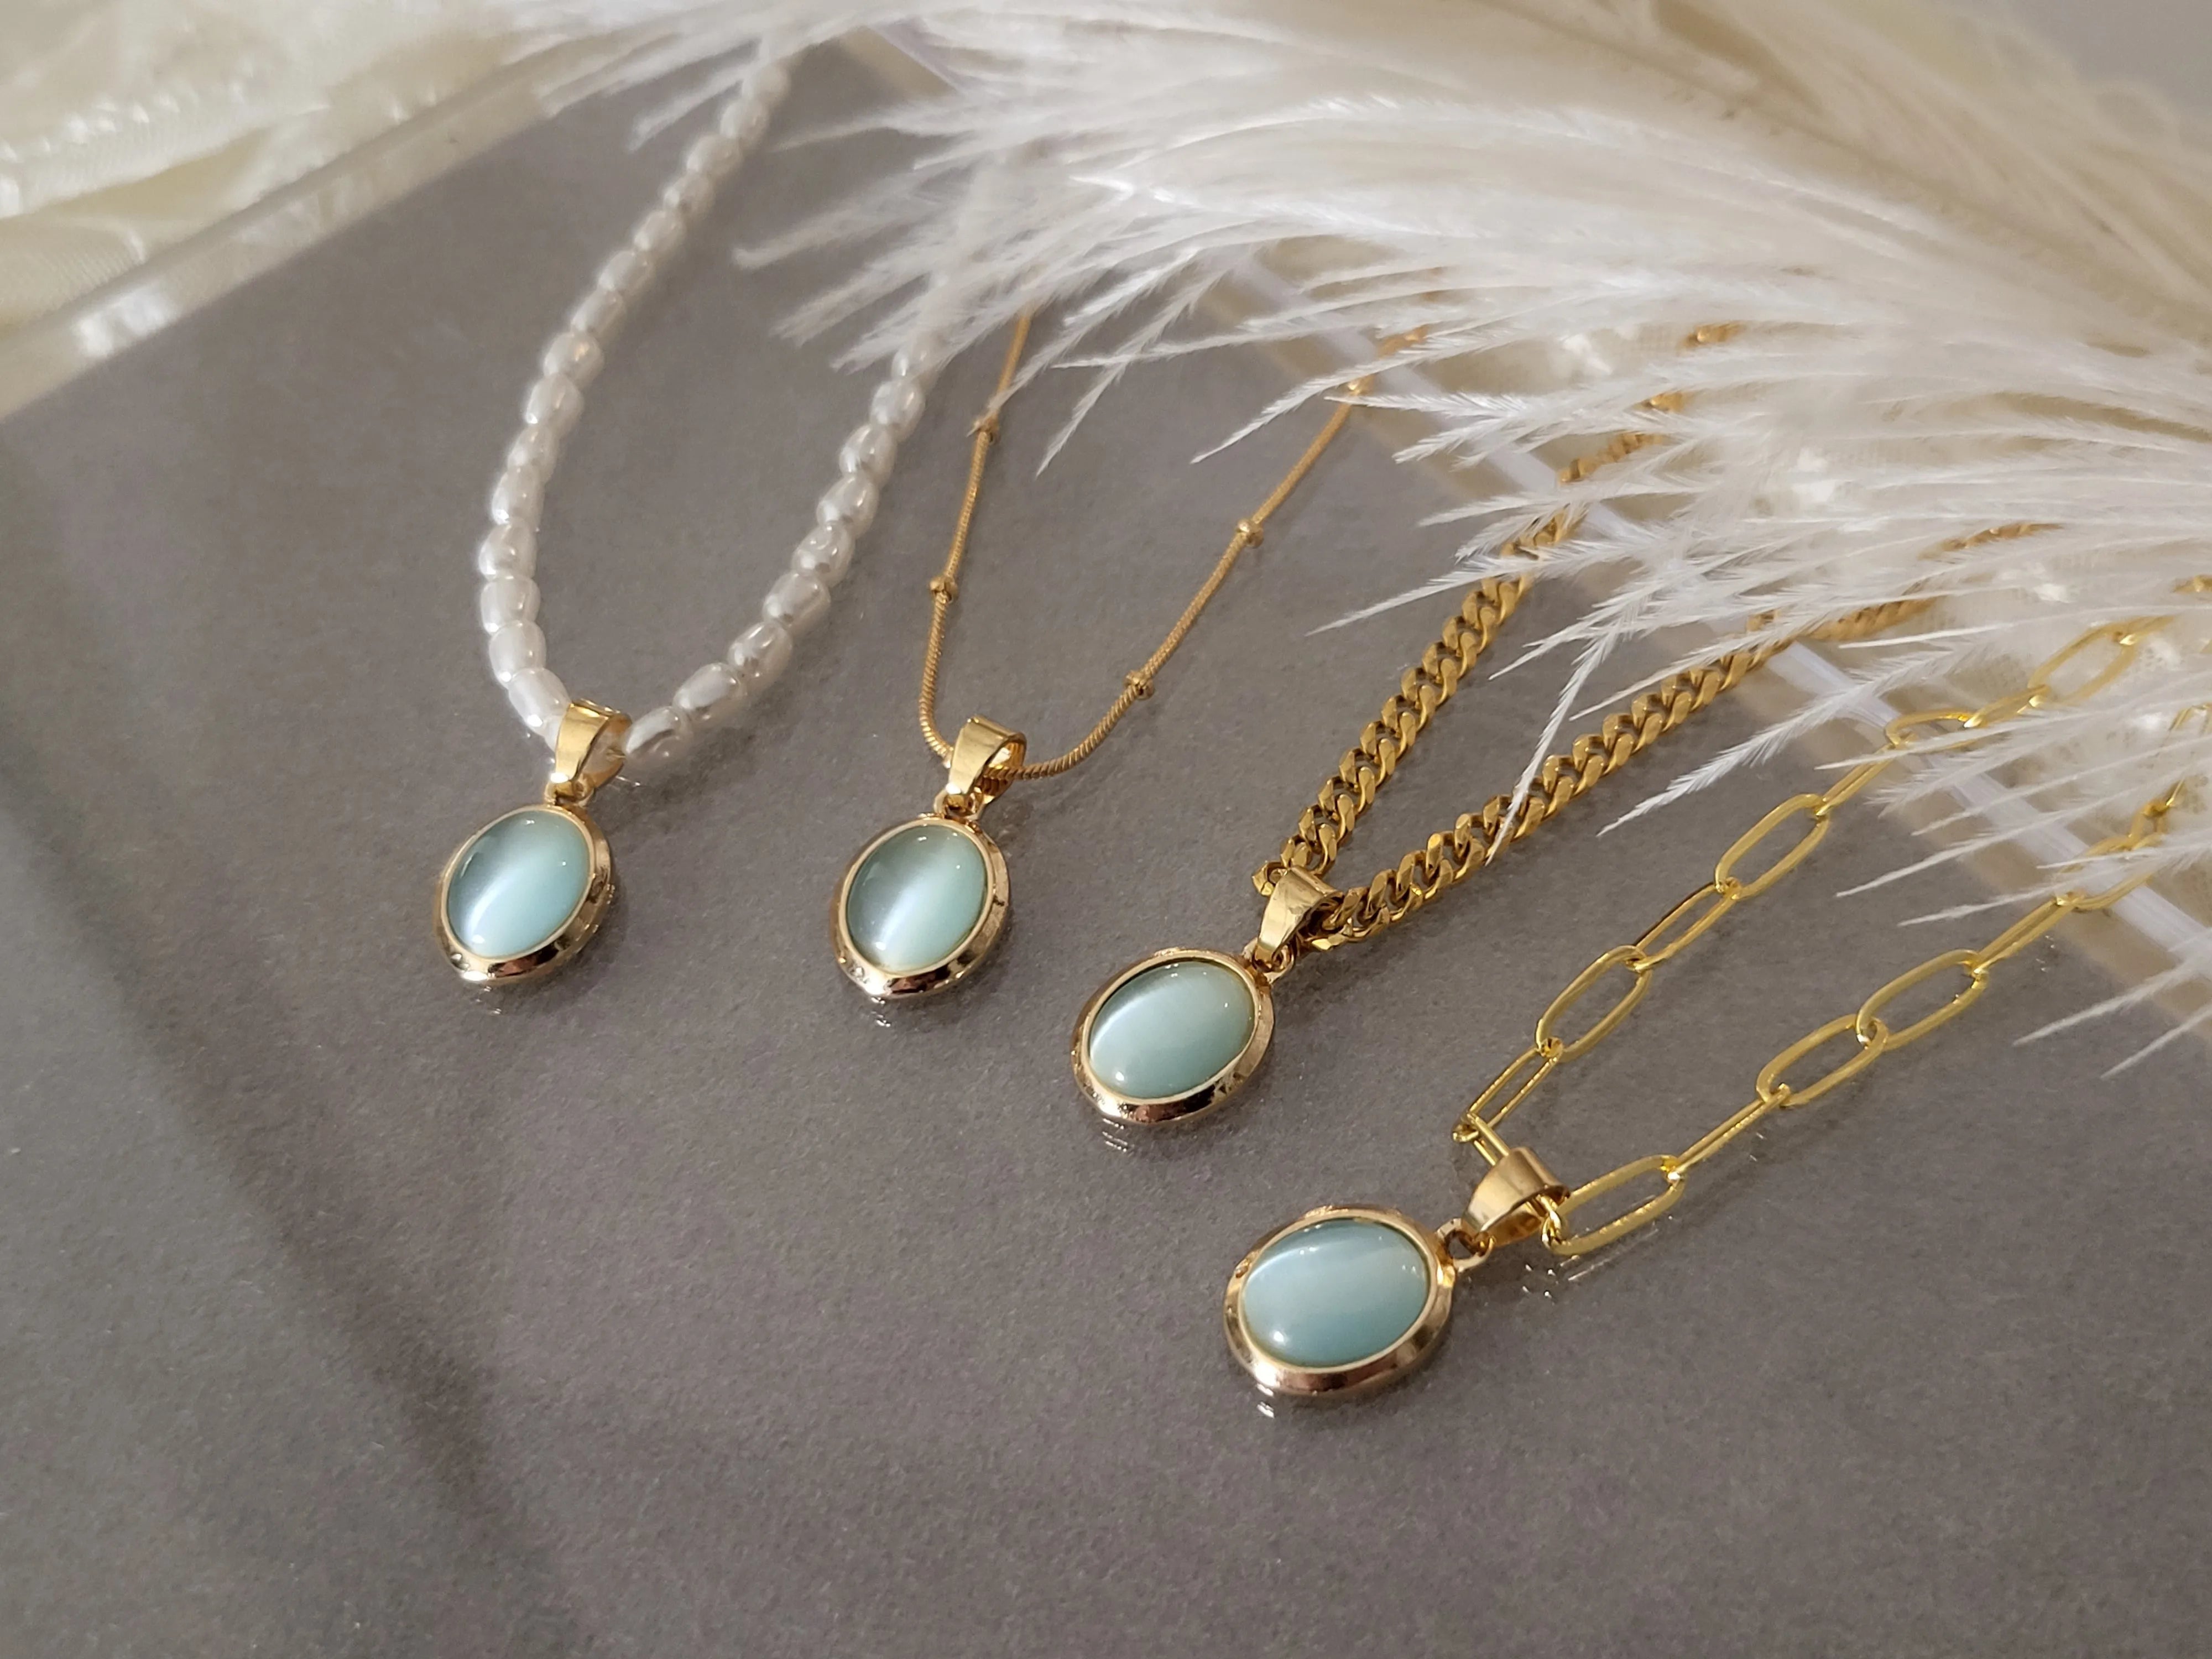 Thelma Opal Necklace product images.